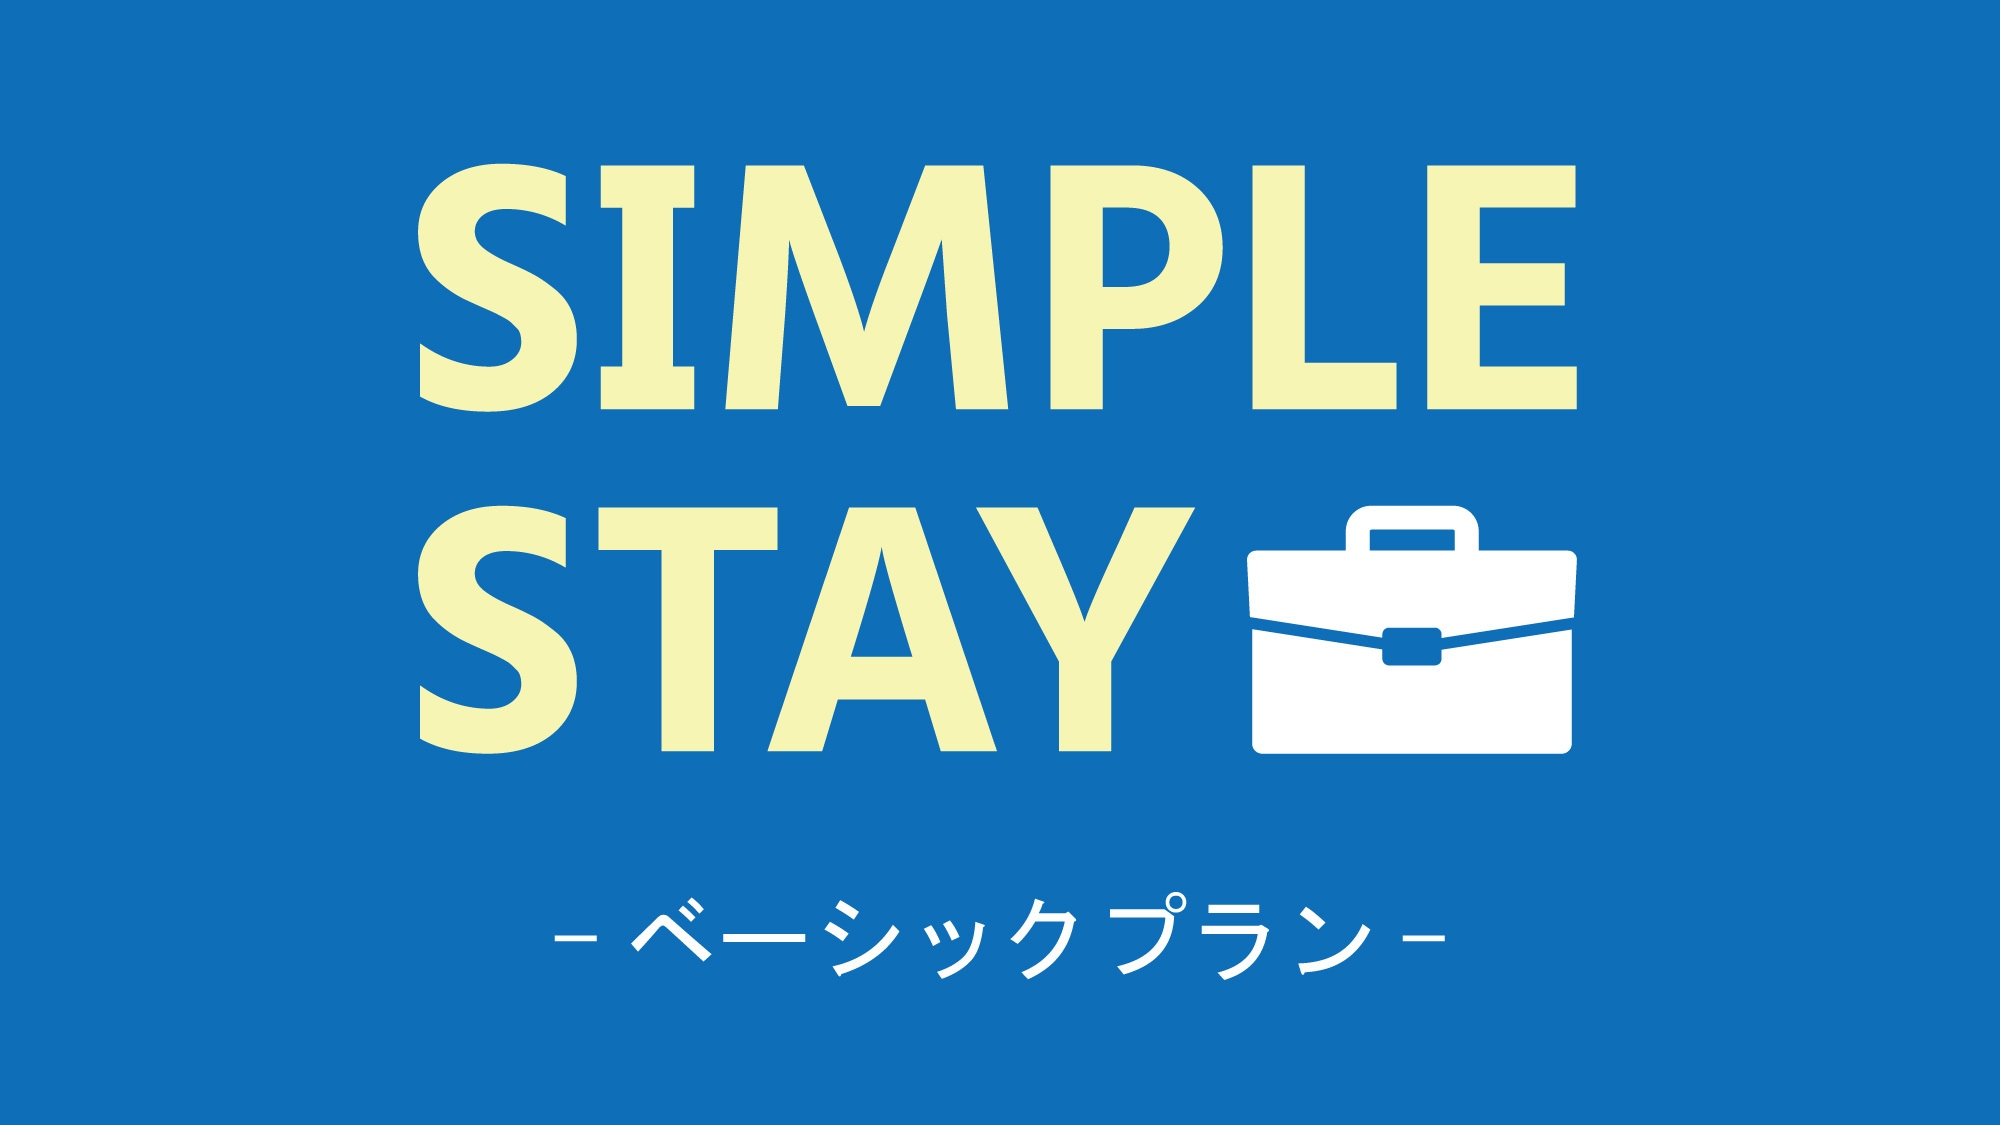 【SIMPLE STAY】◇ベーシックプラン◇／素泊り